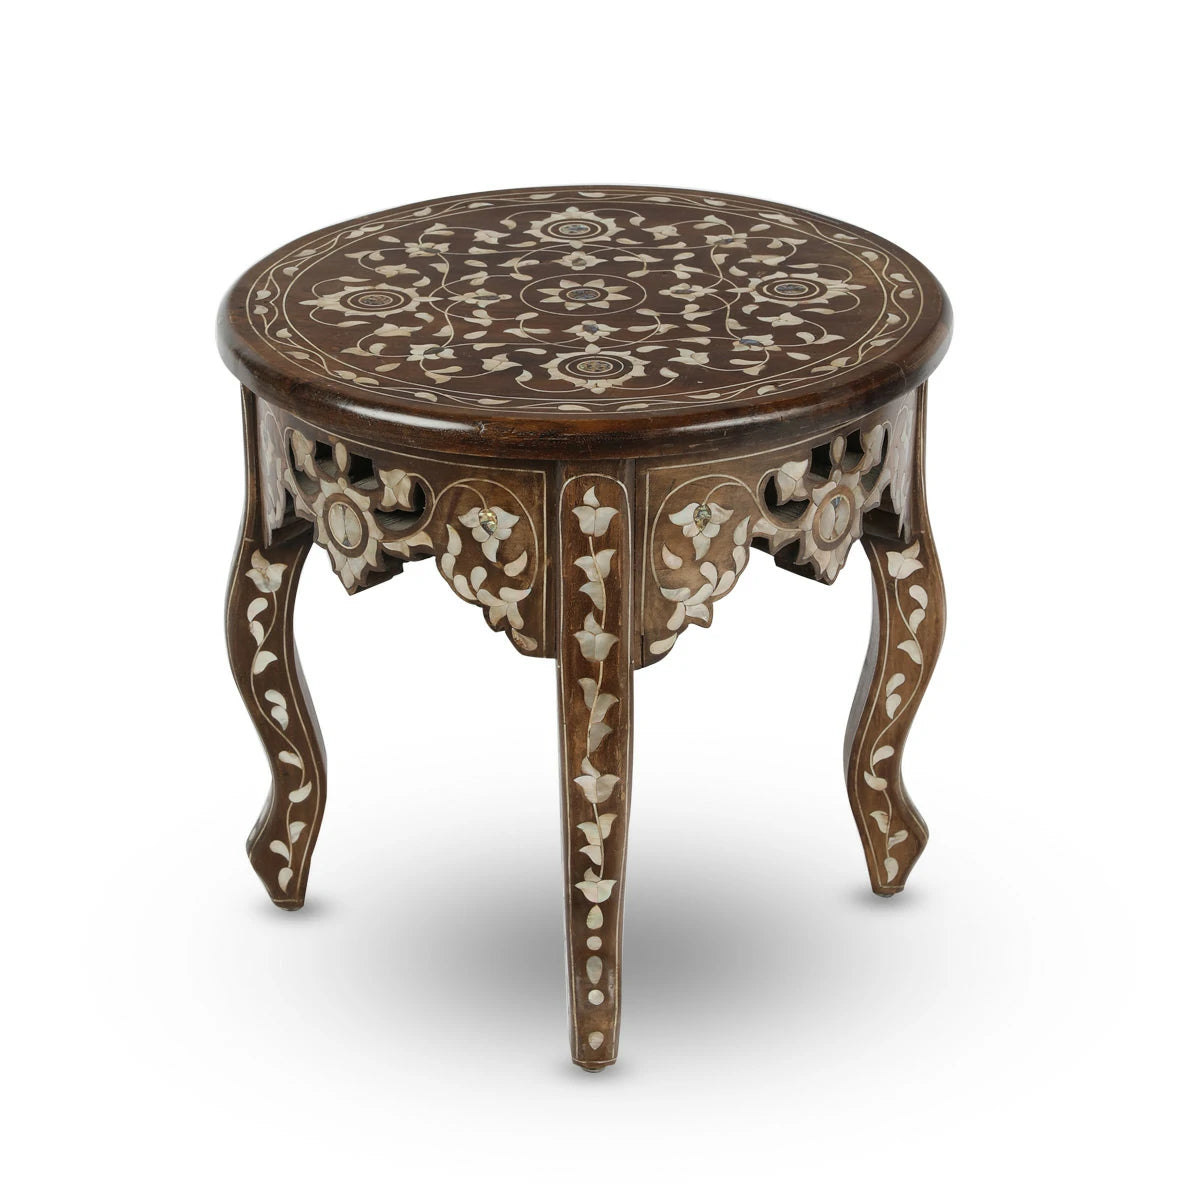 Authentic Traditional Syrian Coffee Table / Side Table